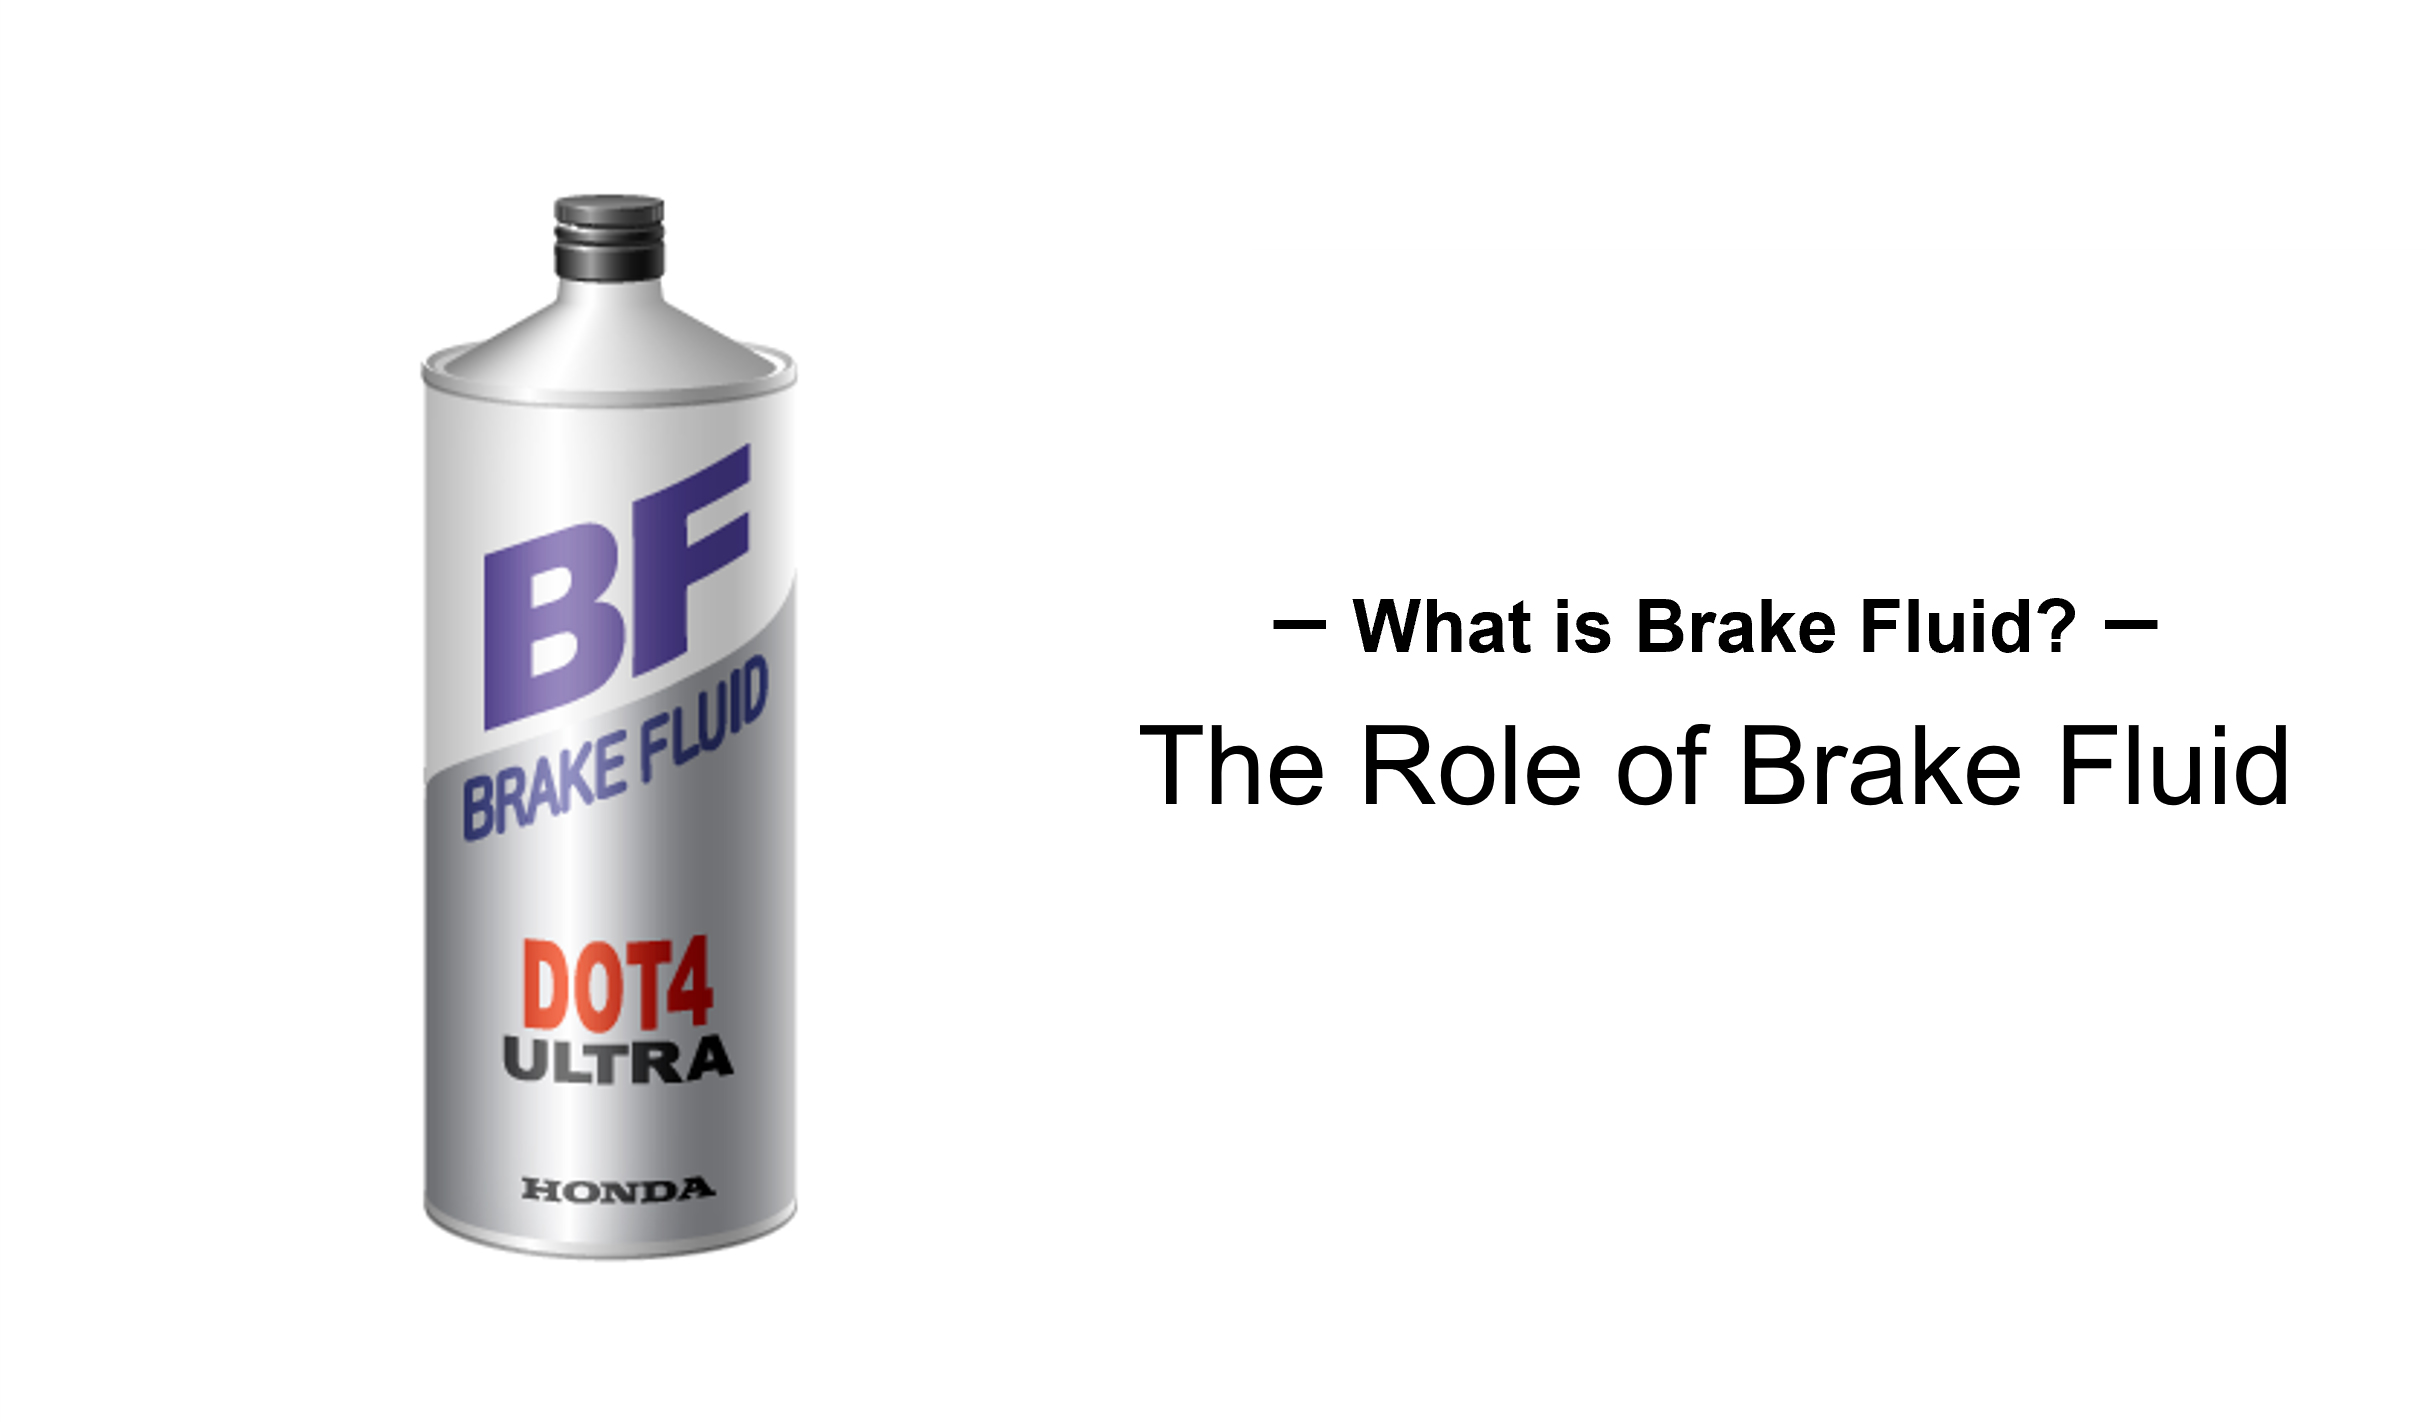 The Role of Brake Fluid: What is Brake Fluid?